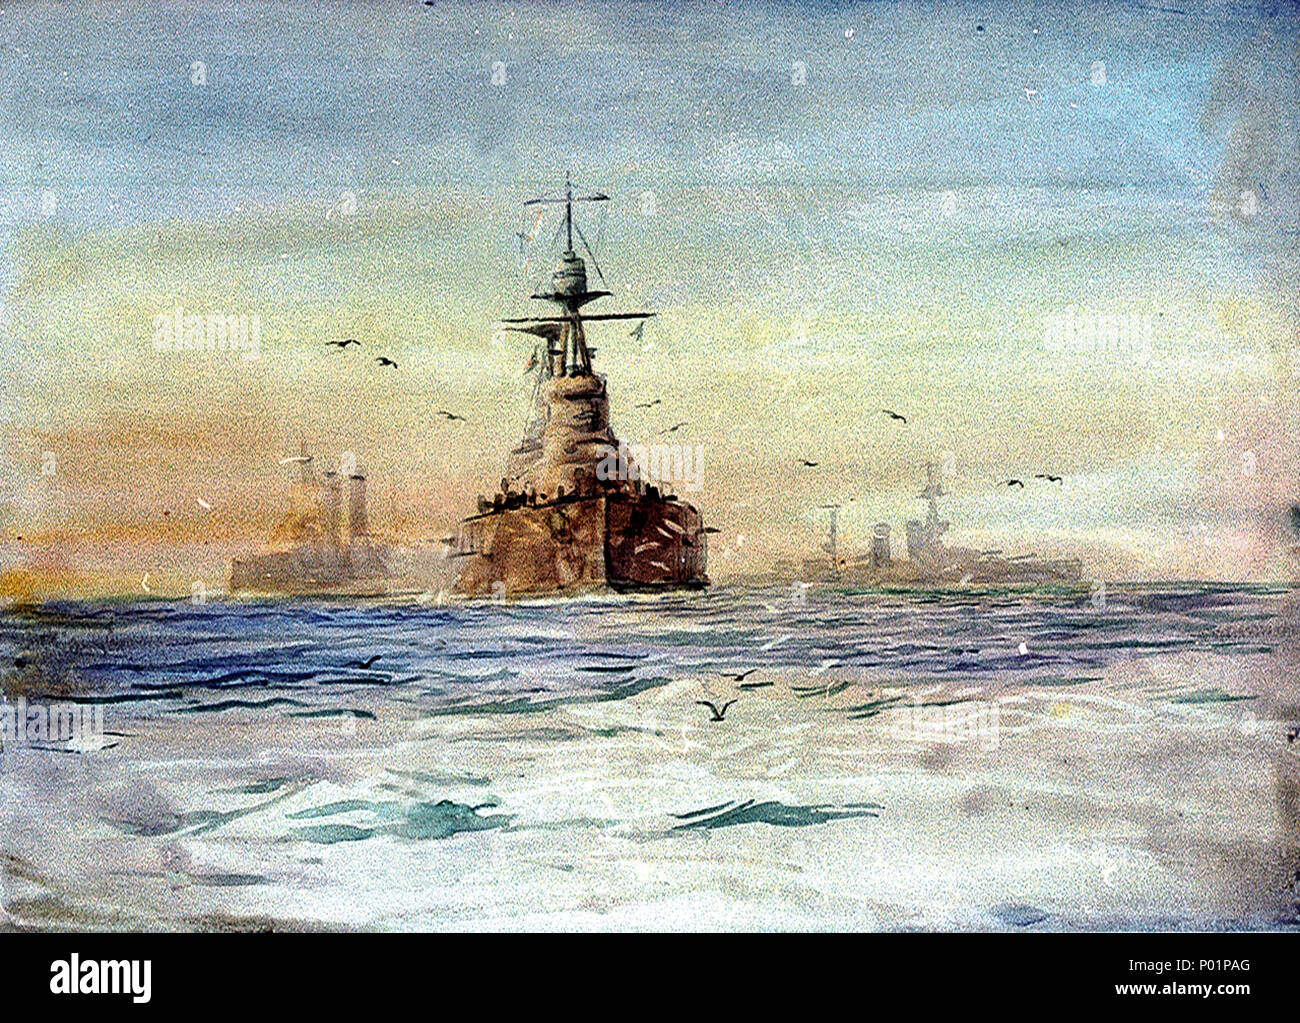 .  English: 'Queen Elizabeth'-class battleships at sea, with seagulls A study of three Royal Naval capital ships - apparently 'Queen Elizabeth'-class battleships - on a calm blue sea, either at dawn or sunset.  . after 1915.    William Lionel Wyllie  (1851–1931)     Alternative names W. L. Wyllie  Description British painter  Date of birth/death 5 July 1851 6 April 1931  Location of birth/death London London  Authority control  : Q2579750 VIAF:?30430865 ISNI:?0000 0001 1050 1763 ULAN:?500007278 LCCN:?n84116203 NLA:?36532068 WorldCat 6 'Queen Elizabeth'-class battleships at sea, with seagulls R Stock Photo